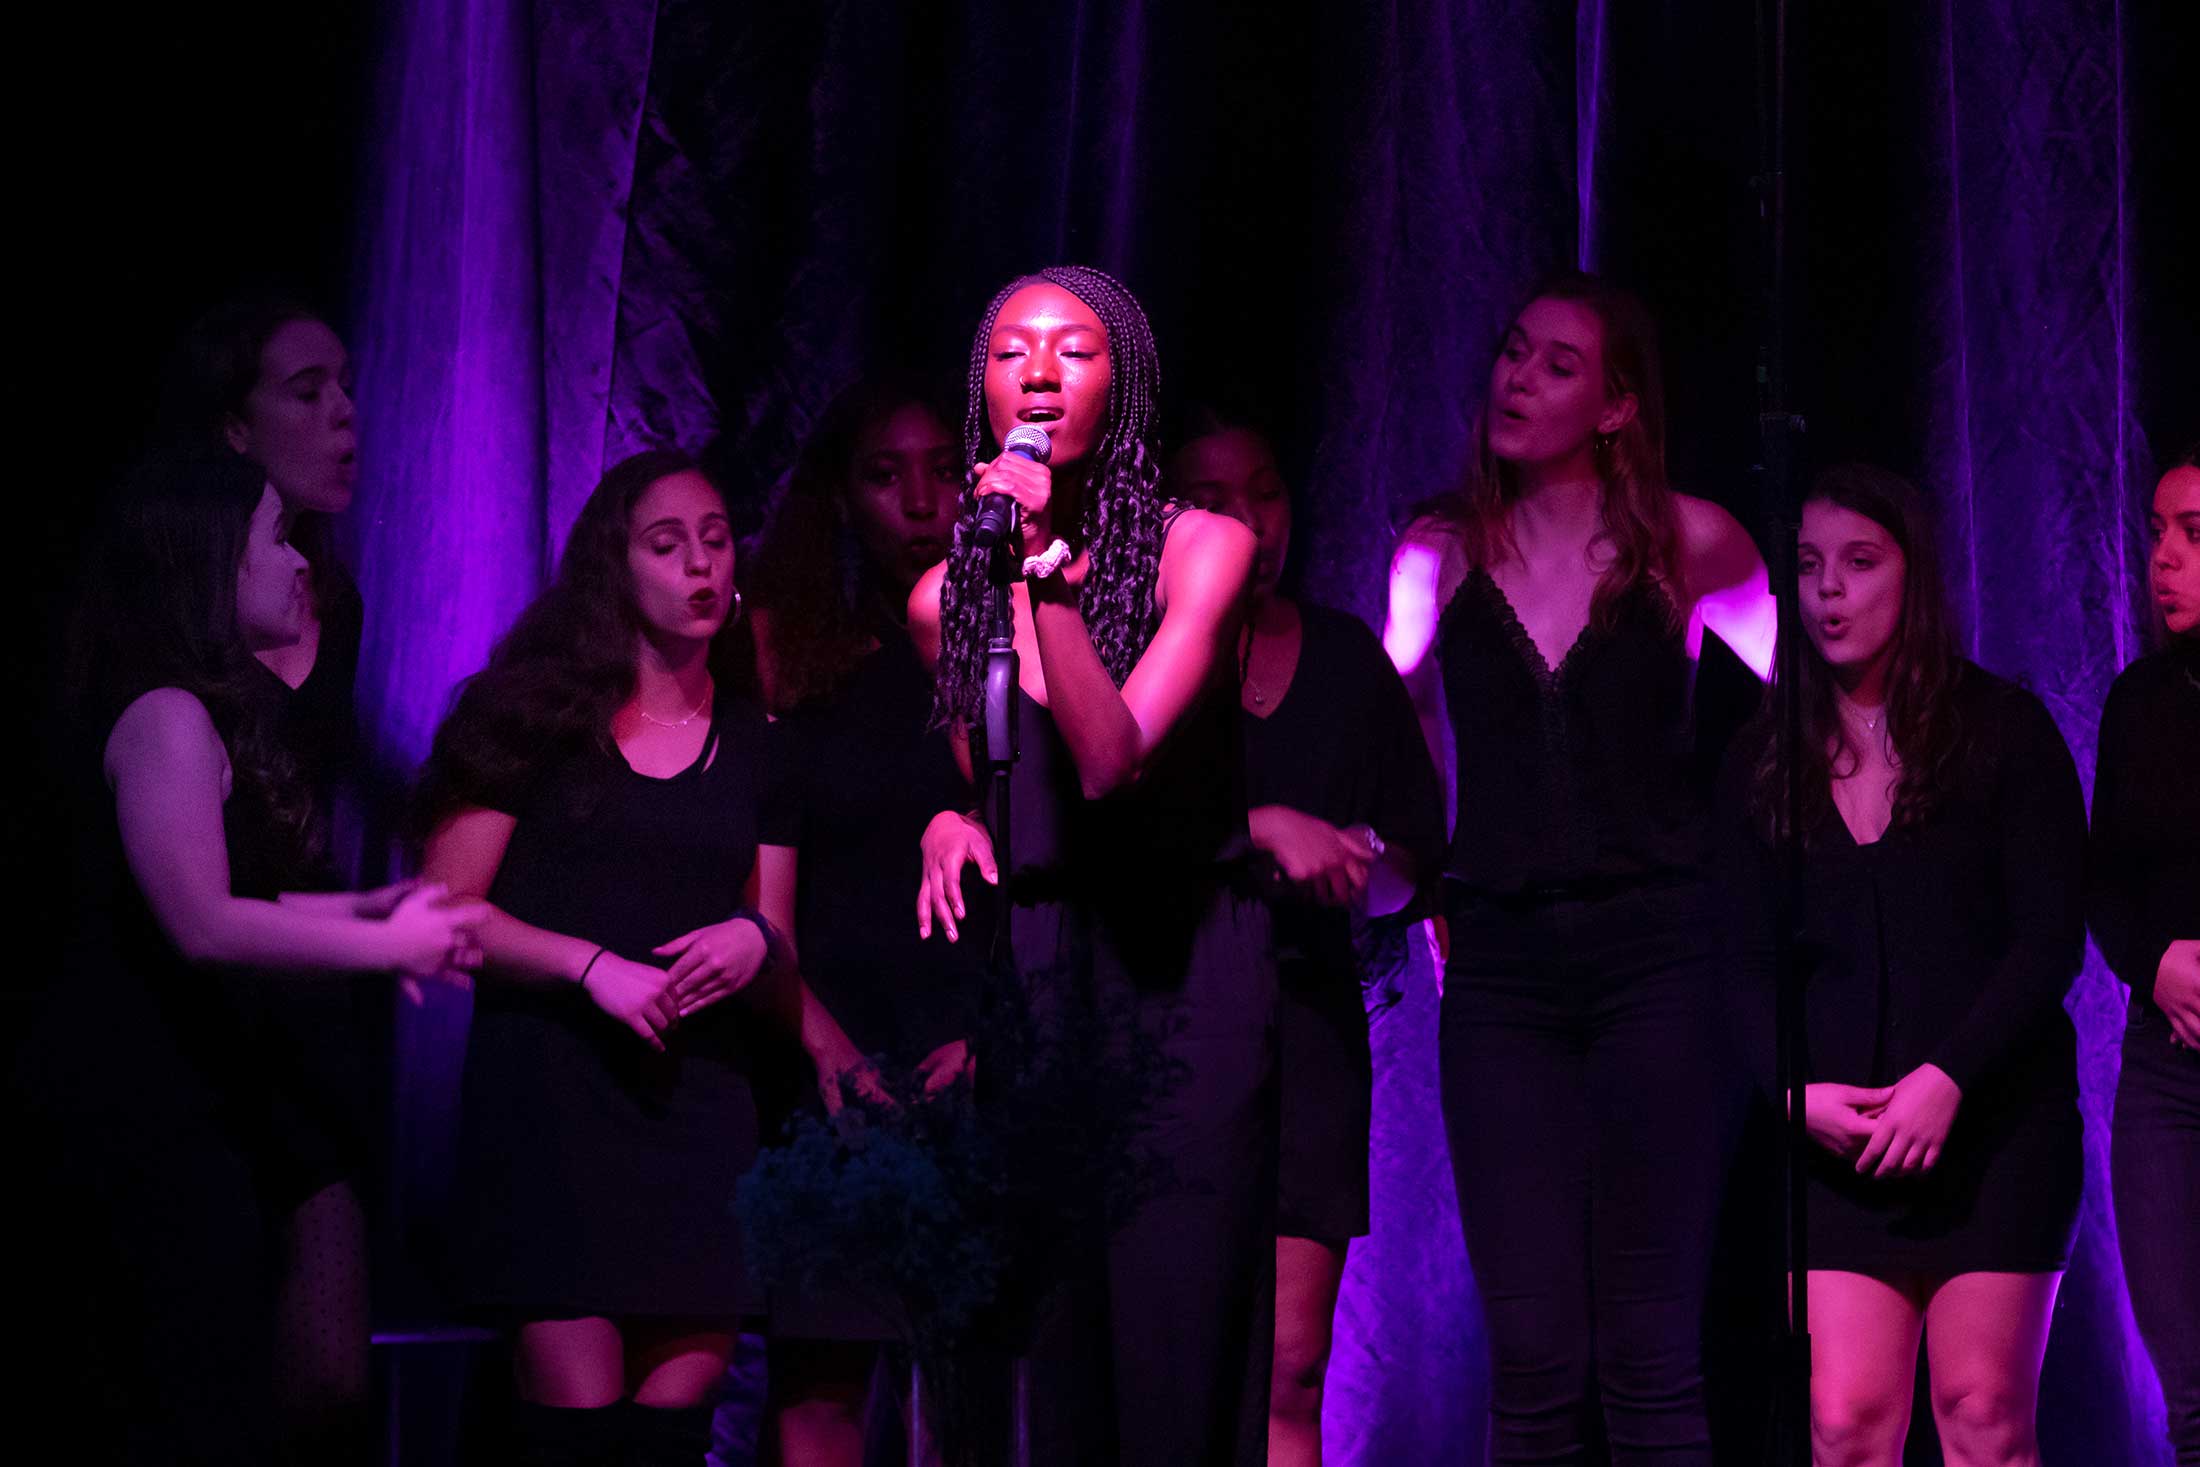 An all female a capella group performing